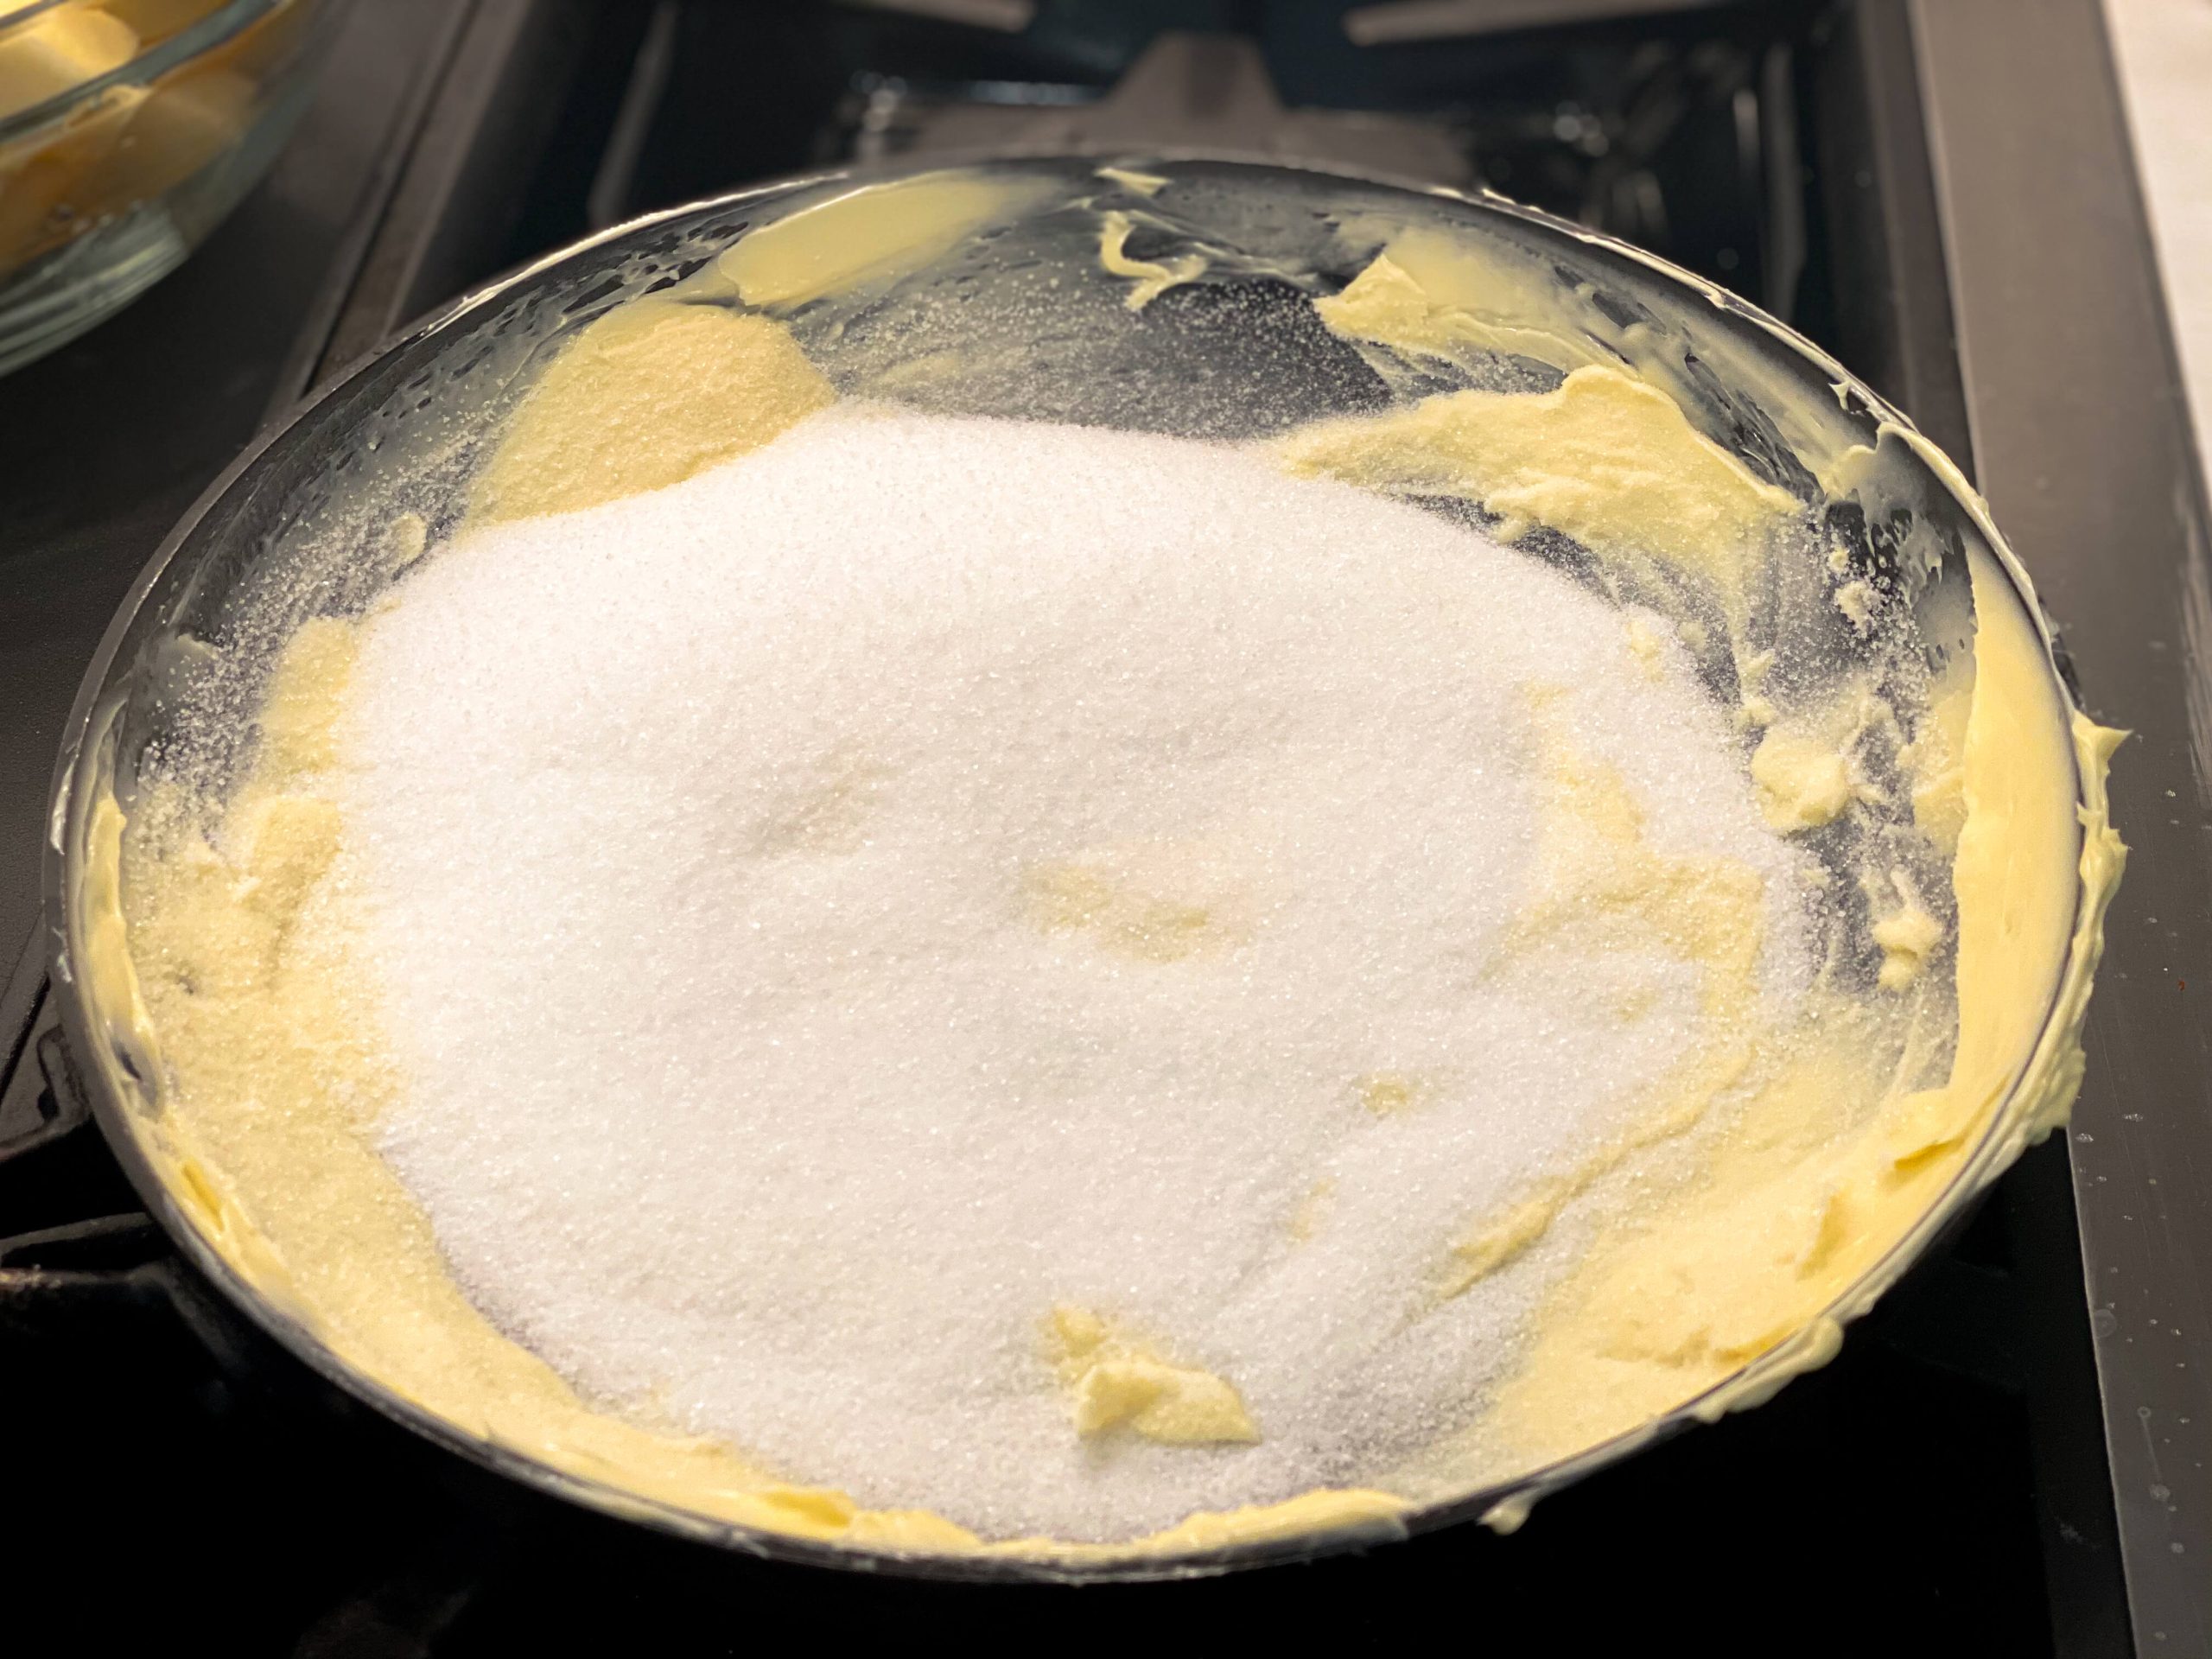 Butter and sugar spread on the pan